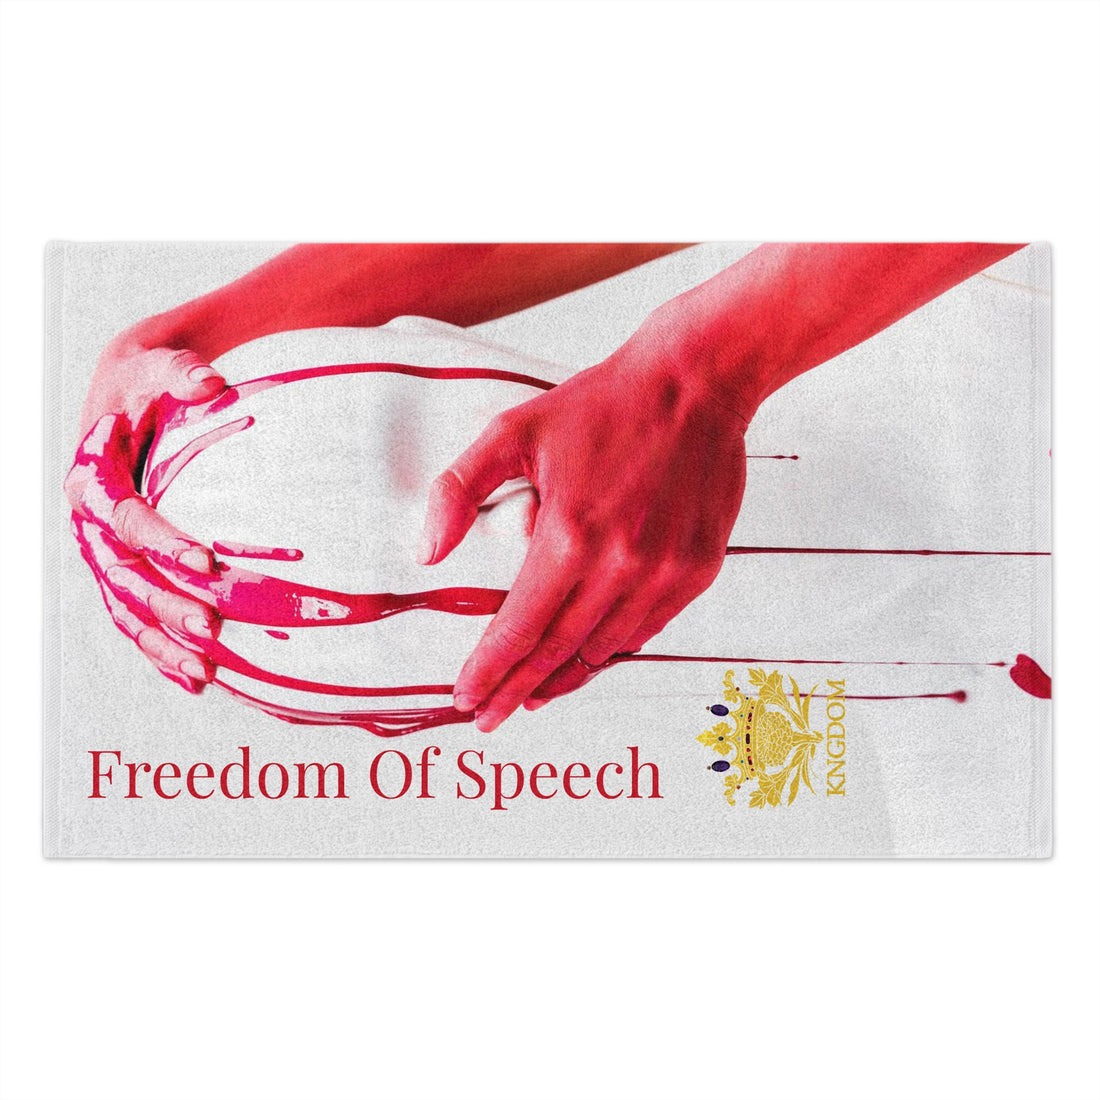 WE ARE AMERICA &quot;Freedom Of Speech&quot; (THE BLOOD OF THE MARTYRS) Rally Towel- &quot;Hand on Head &amp; Mouth&quot; Image W/Kngdom Logo